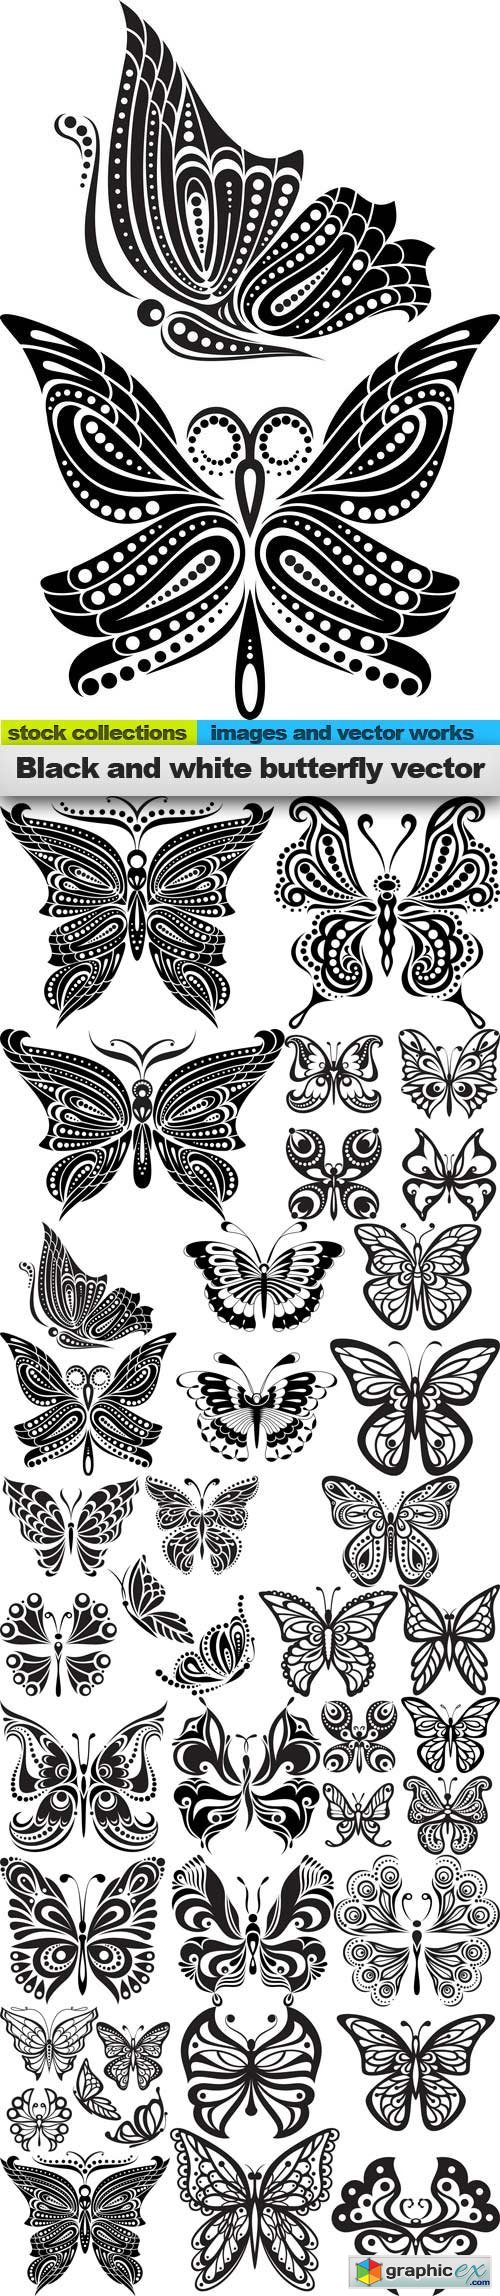 Black and white butterfly vector, 15 x EPS